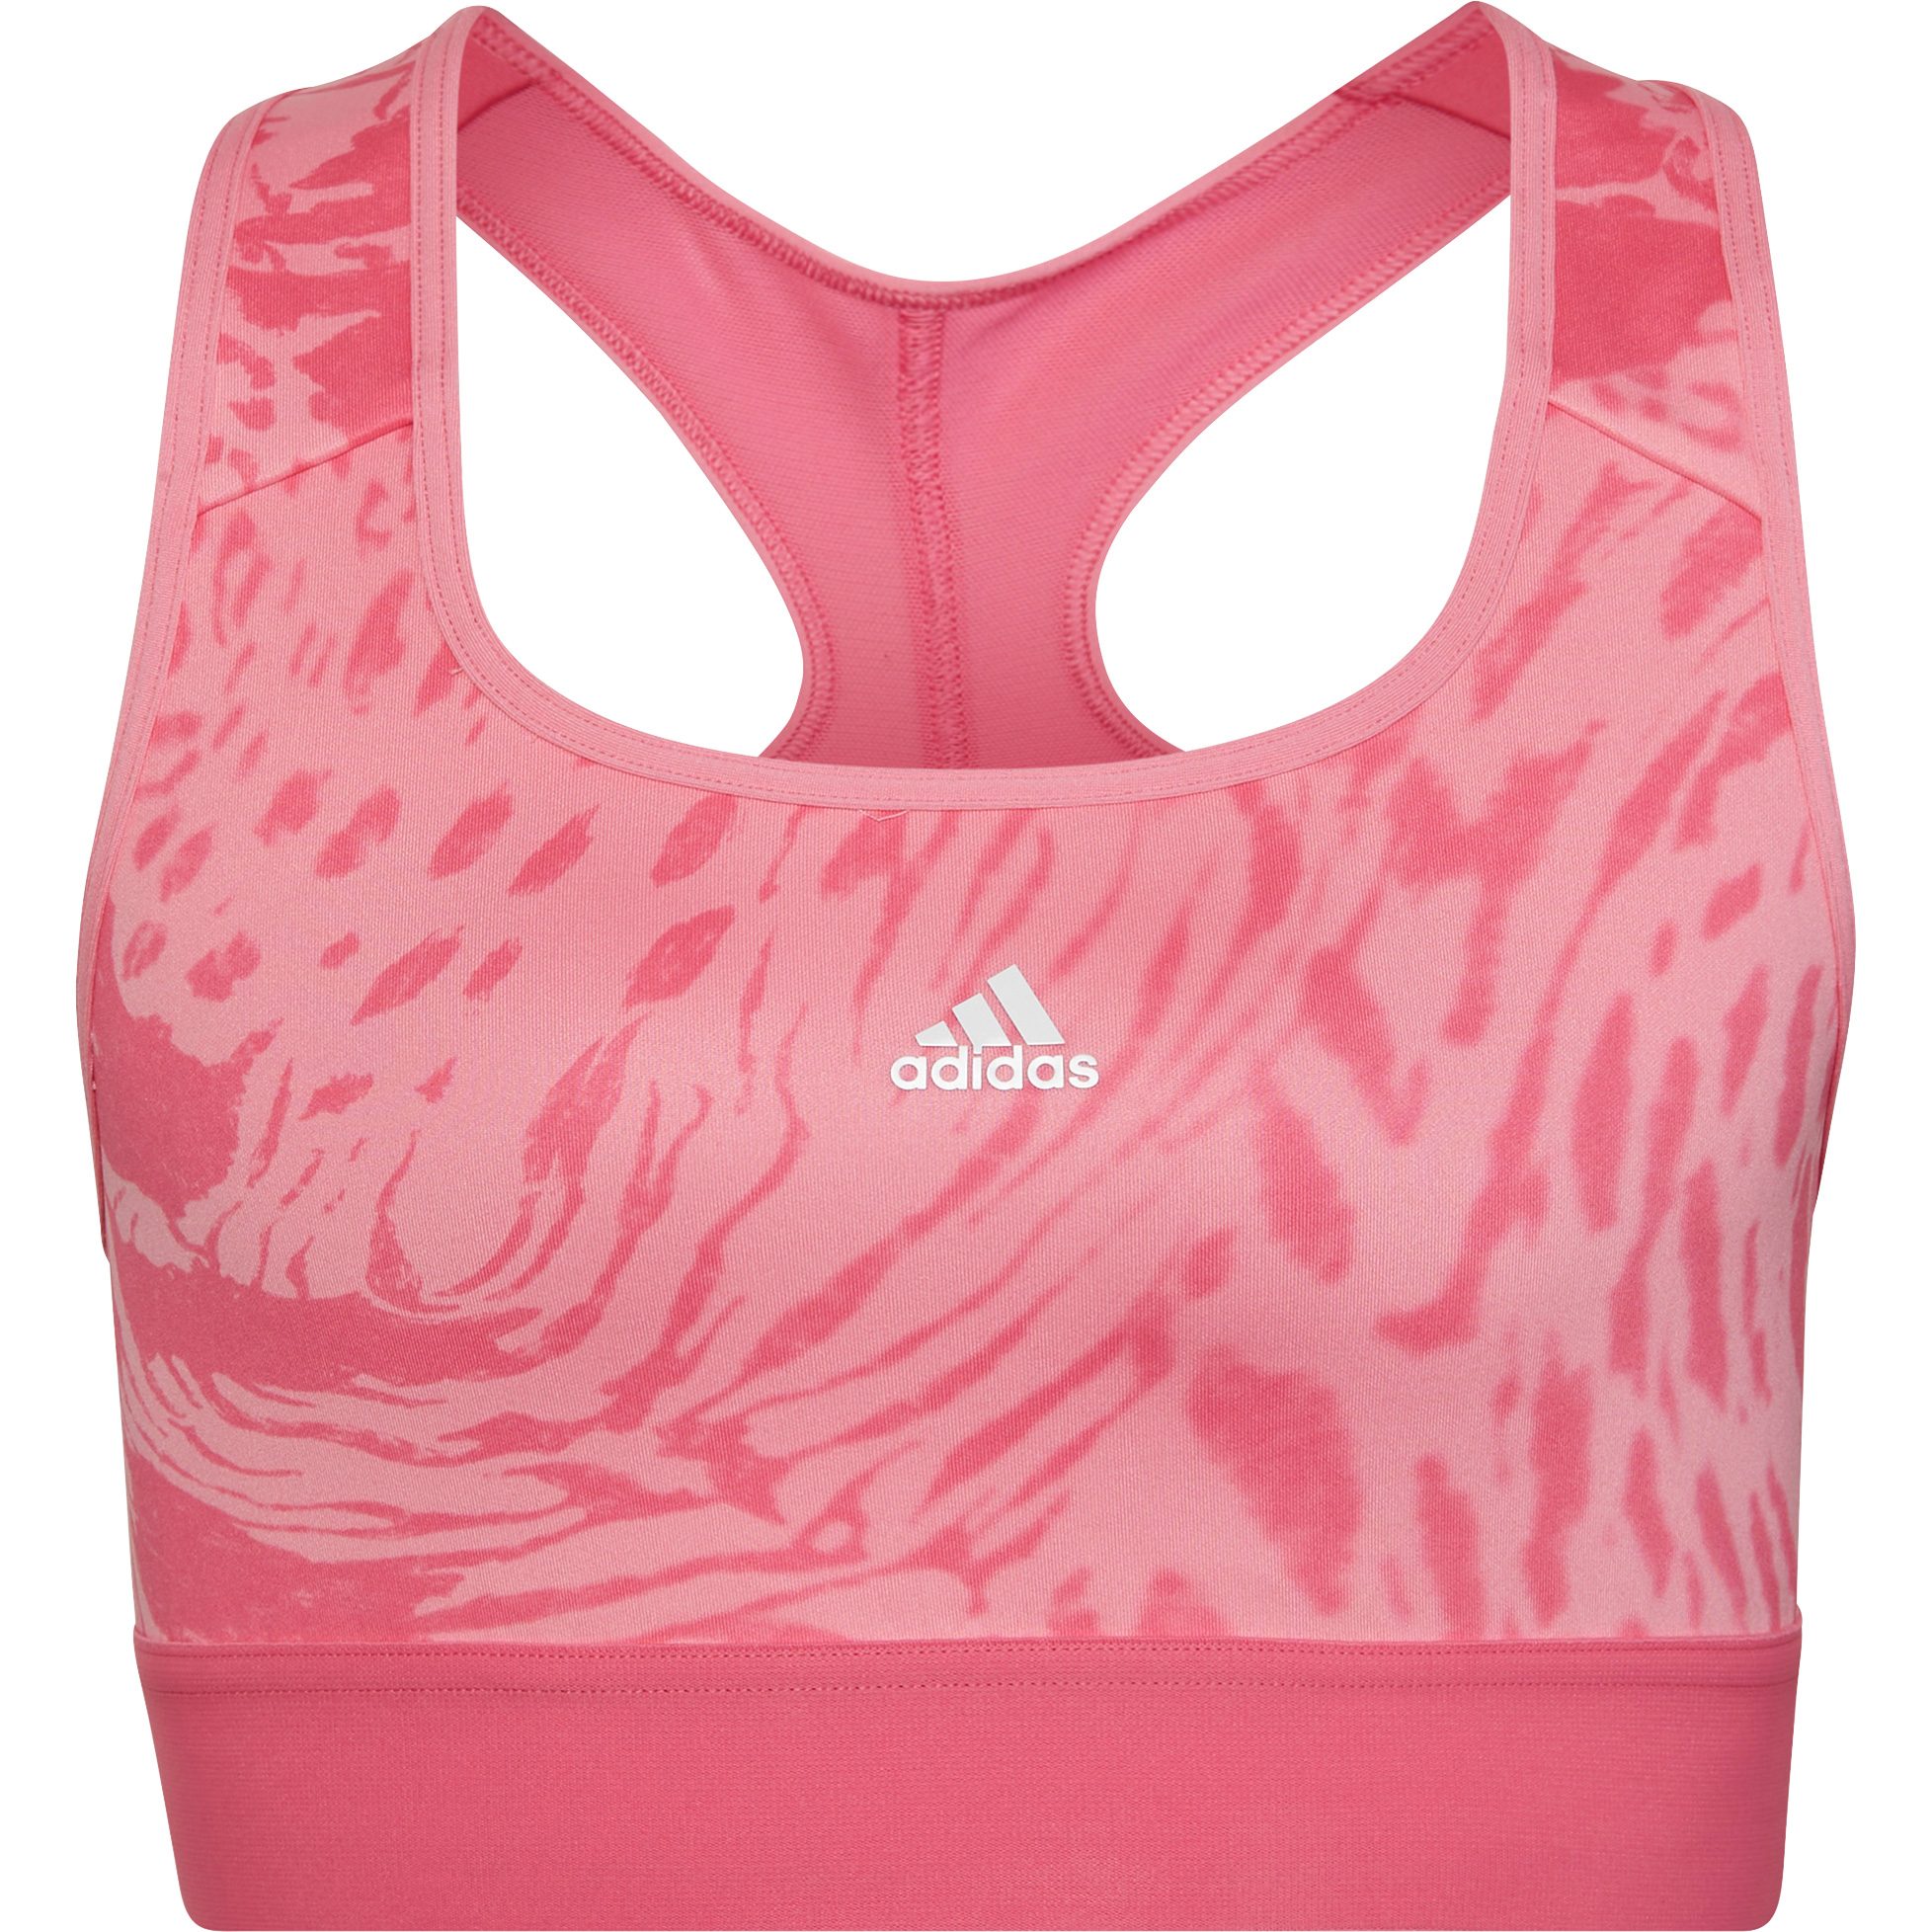 adidas Performance High support sports bra - bliss pink/pink